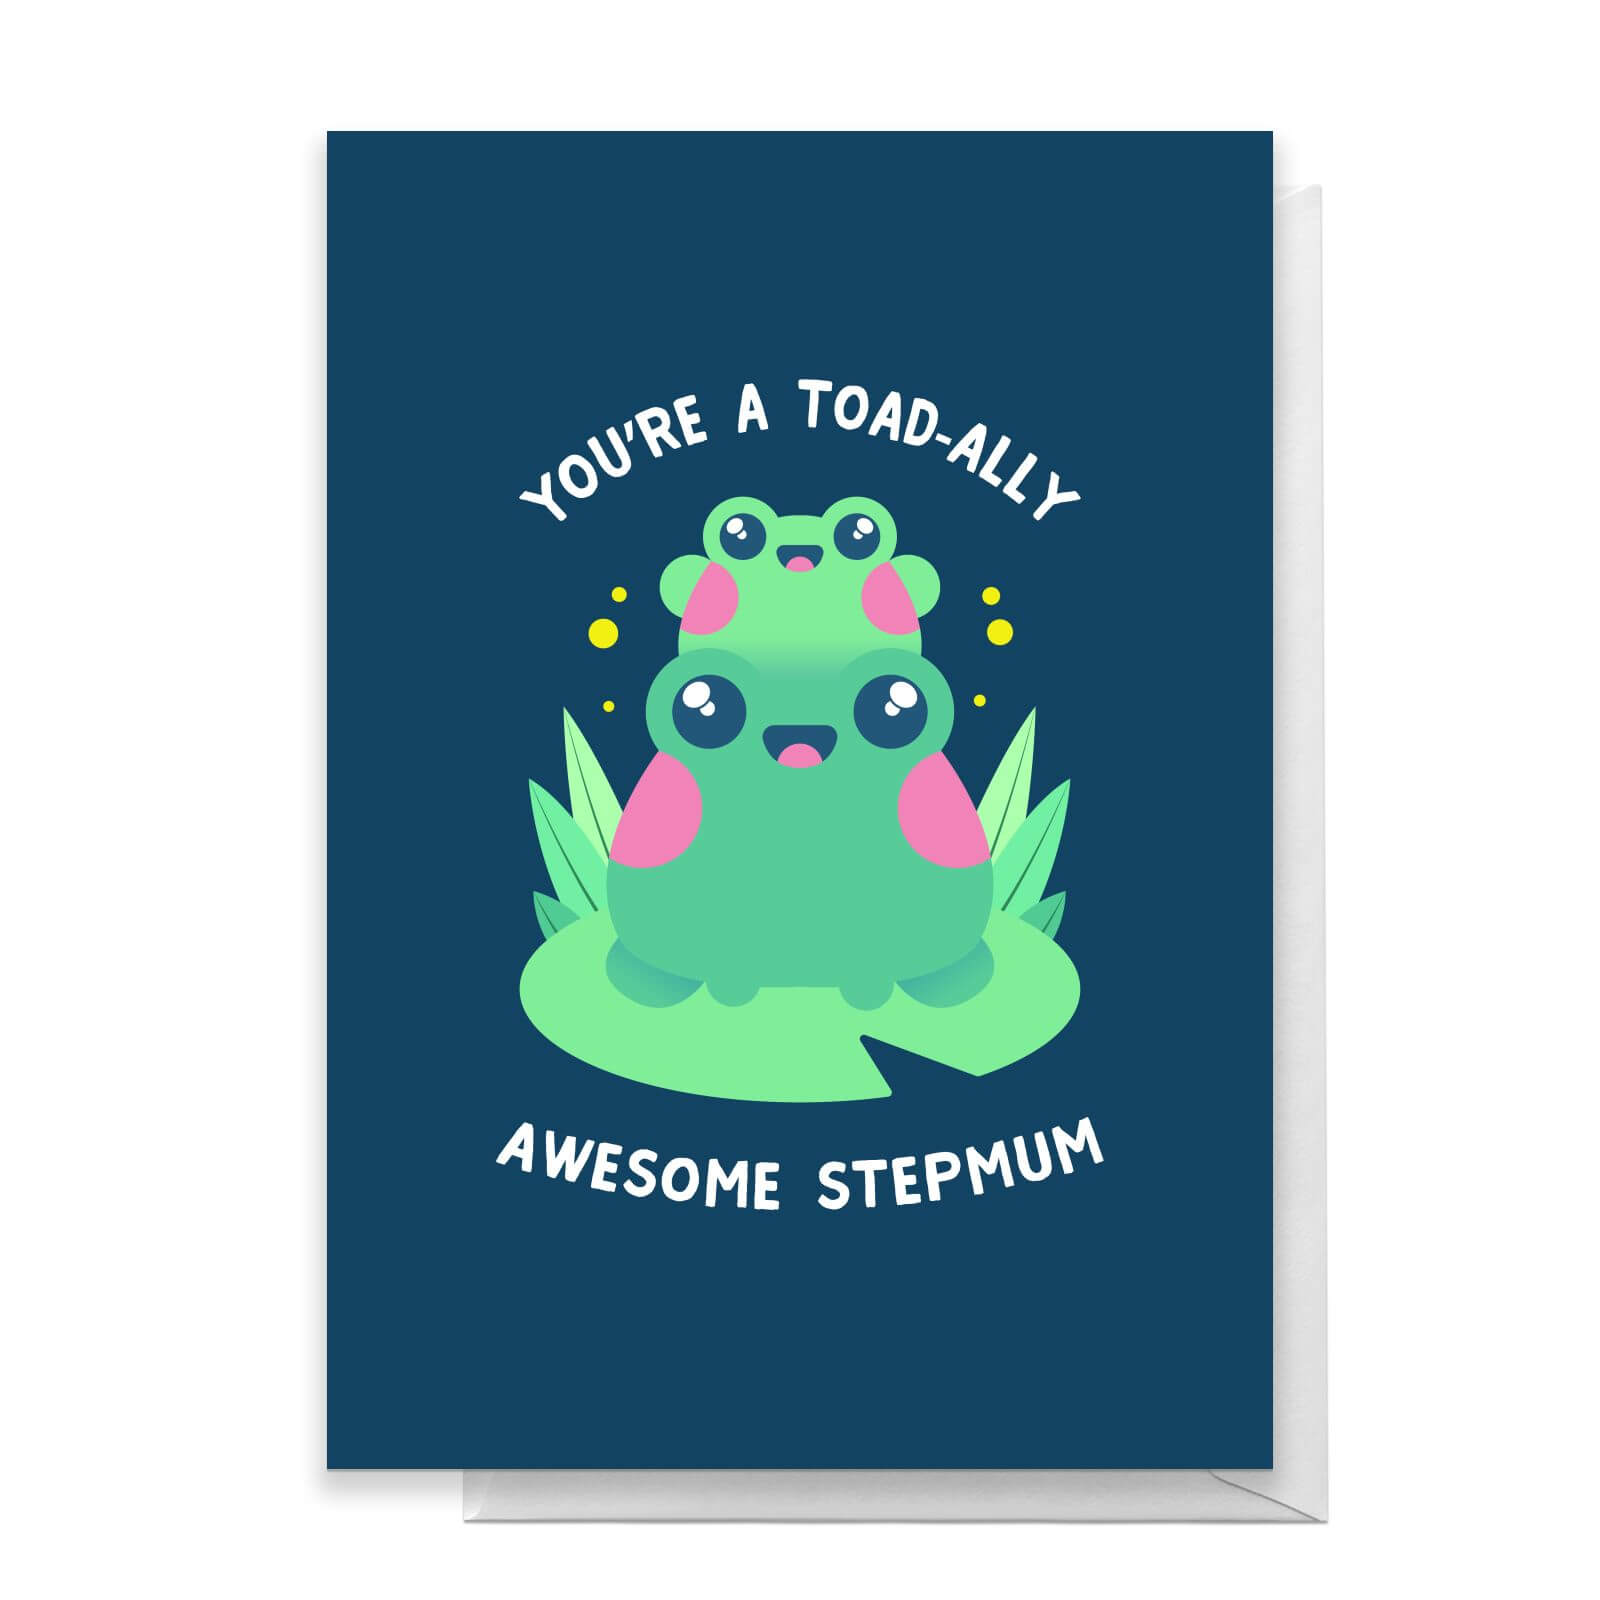 You're A Toad-ally Awesome Stepmum Greetings Card - Standard Card